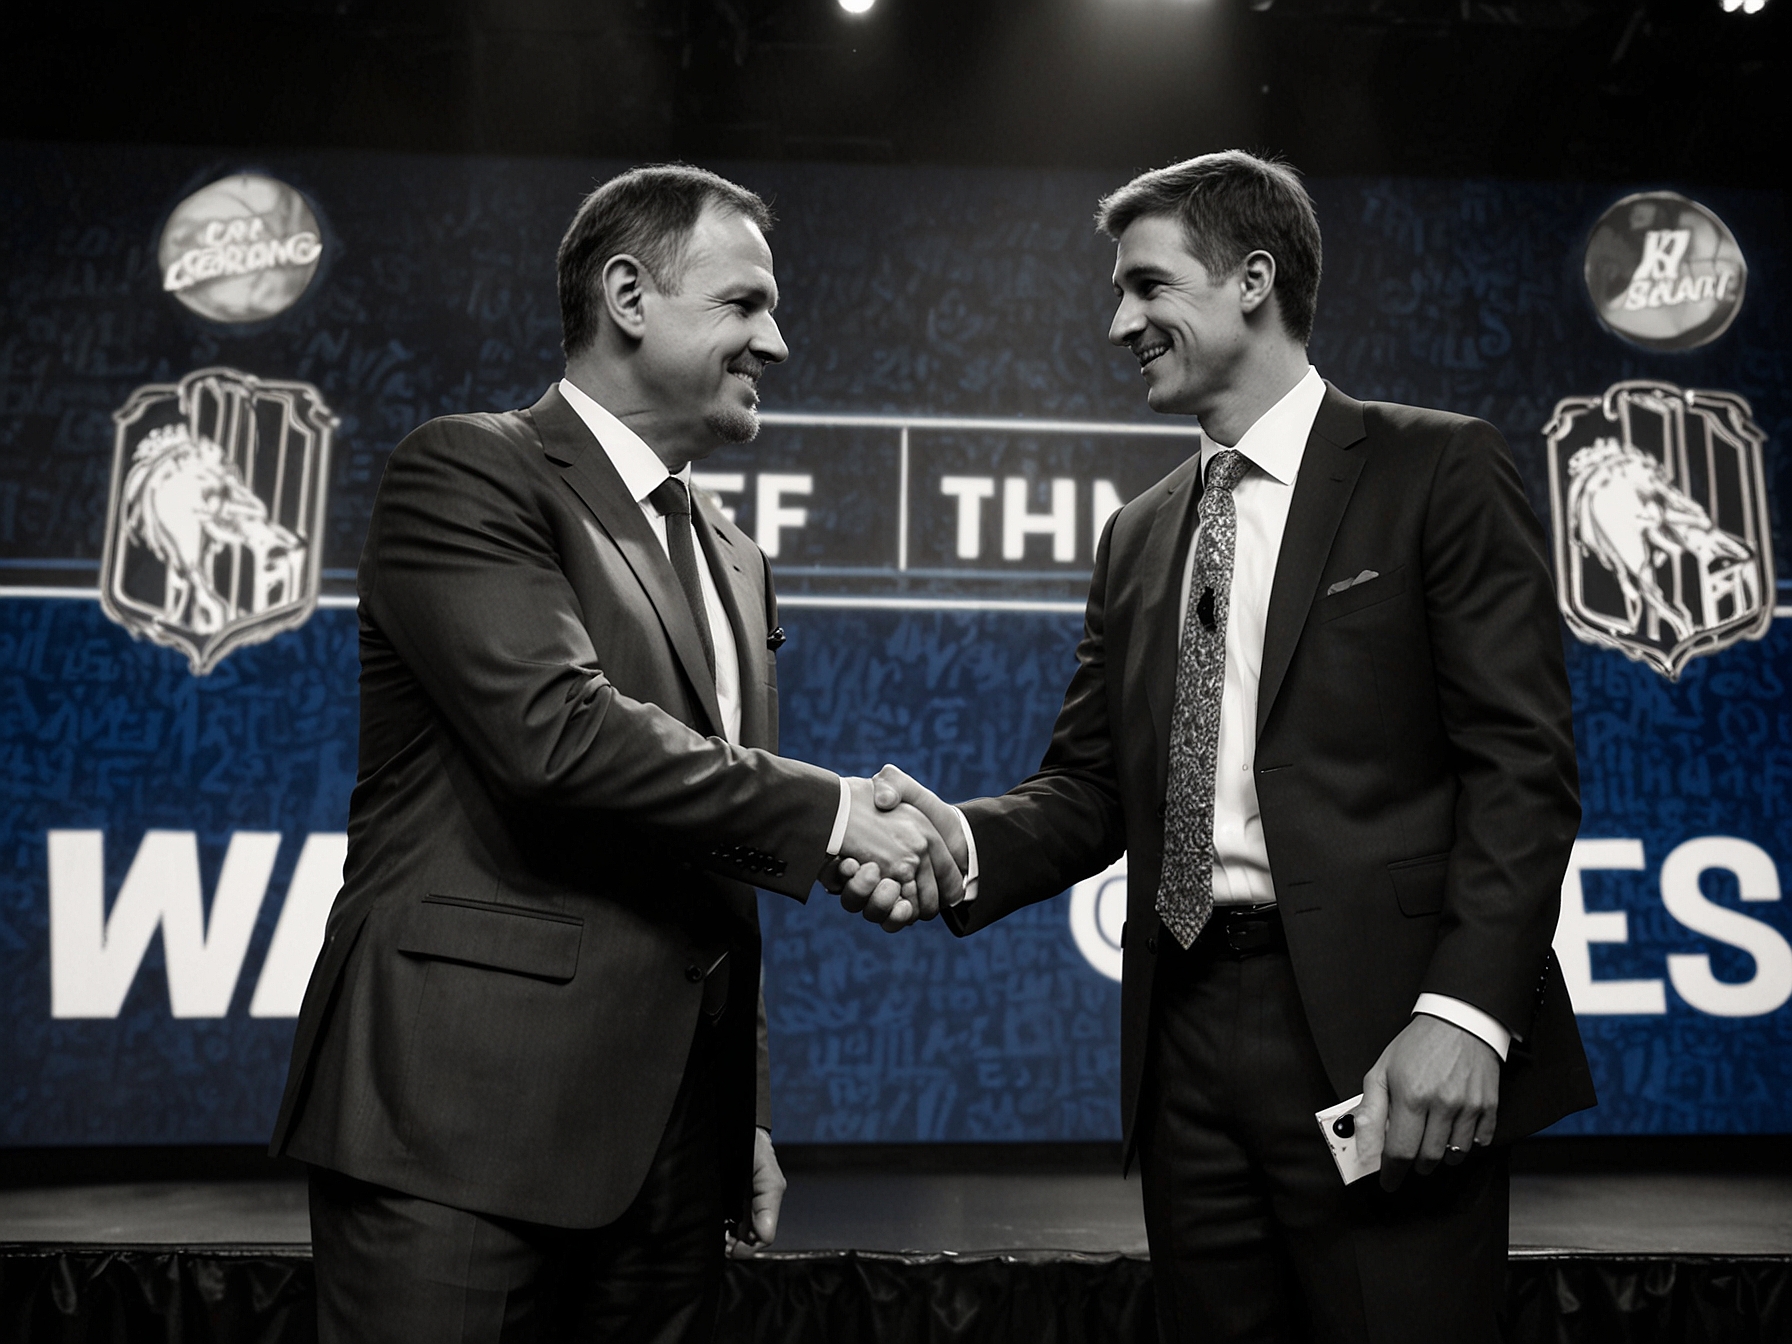 Timberwolves' General Manager Tim Connelly shakes hands with Rob Dillingham on the NBA Draft stage, illustrating the franchise's bold move and new direction.